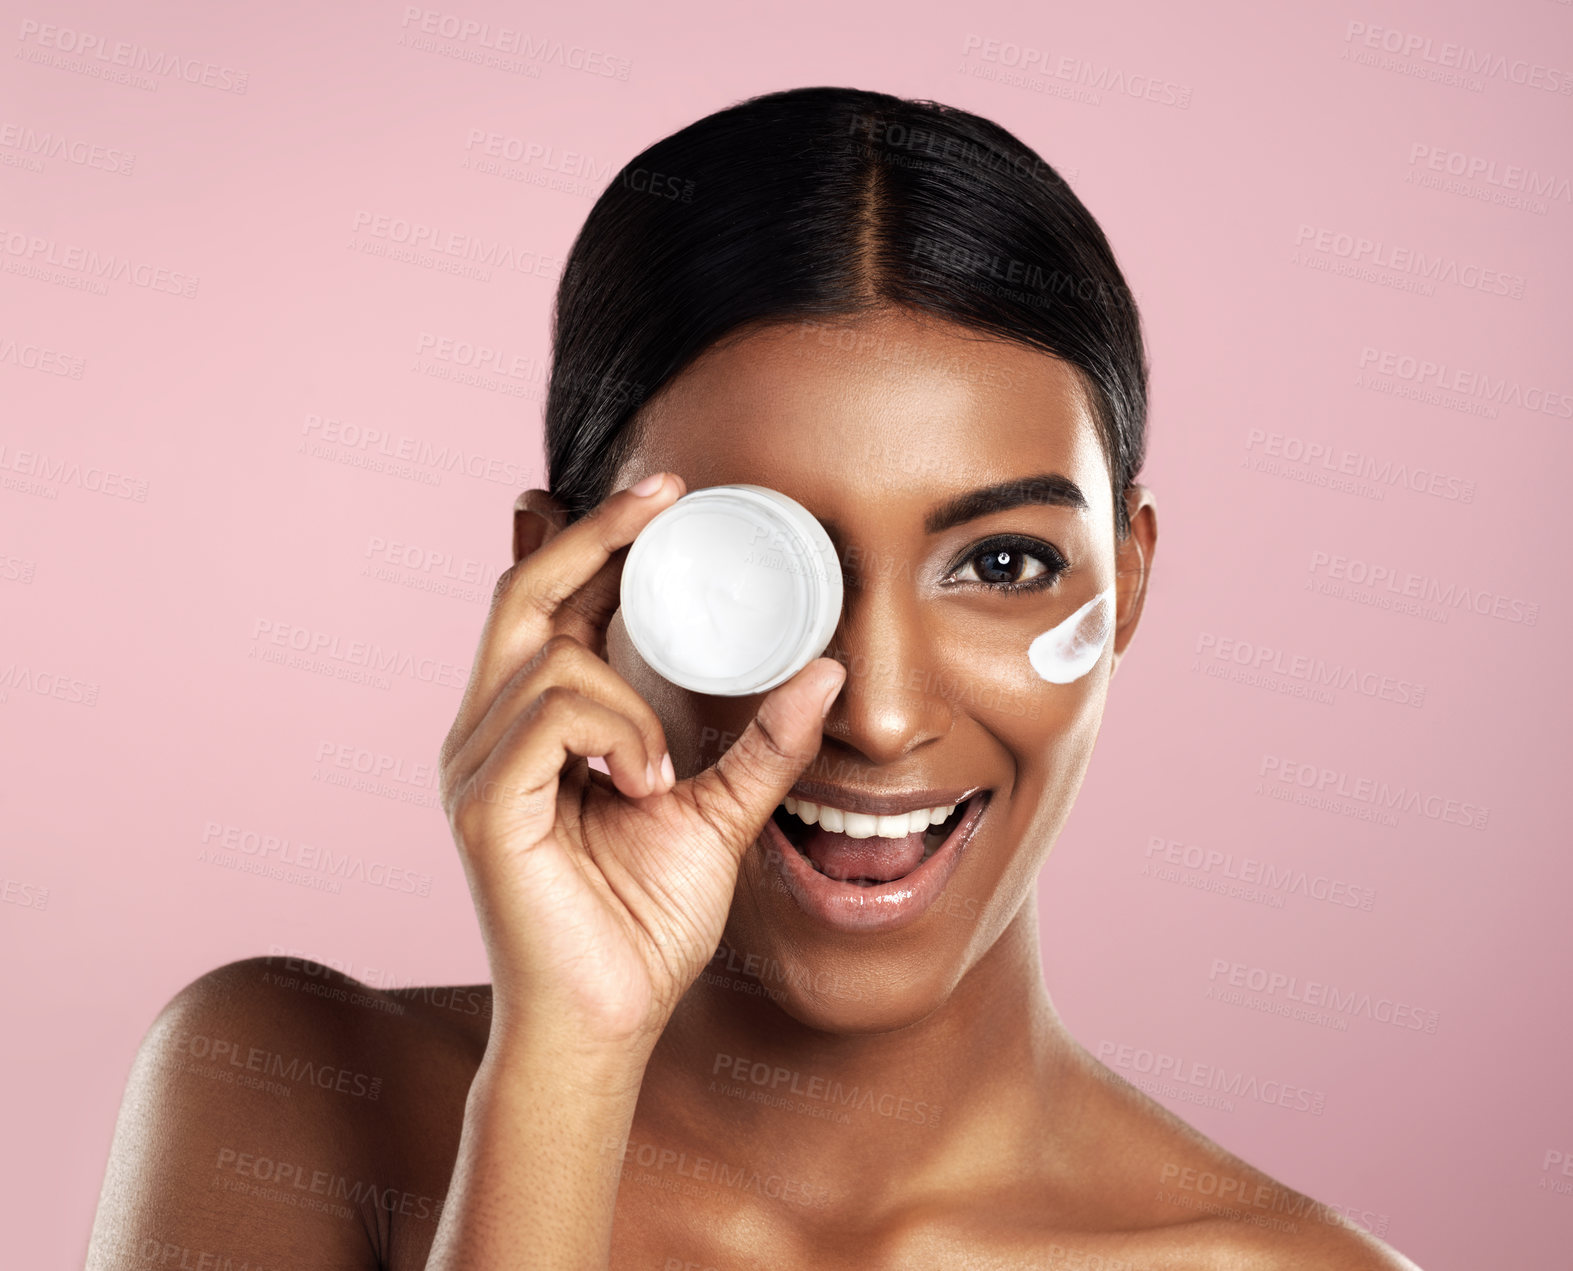 Buy stock photo Studio shot of a beautiful young woman posing with moisturizer on her face against a pink background